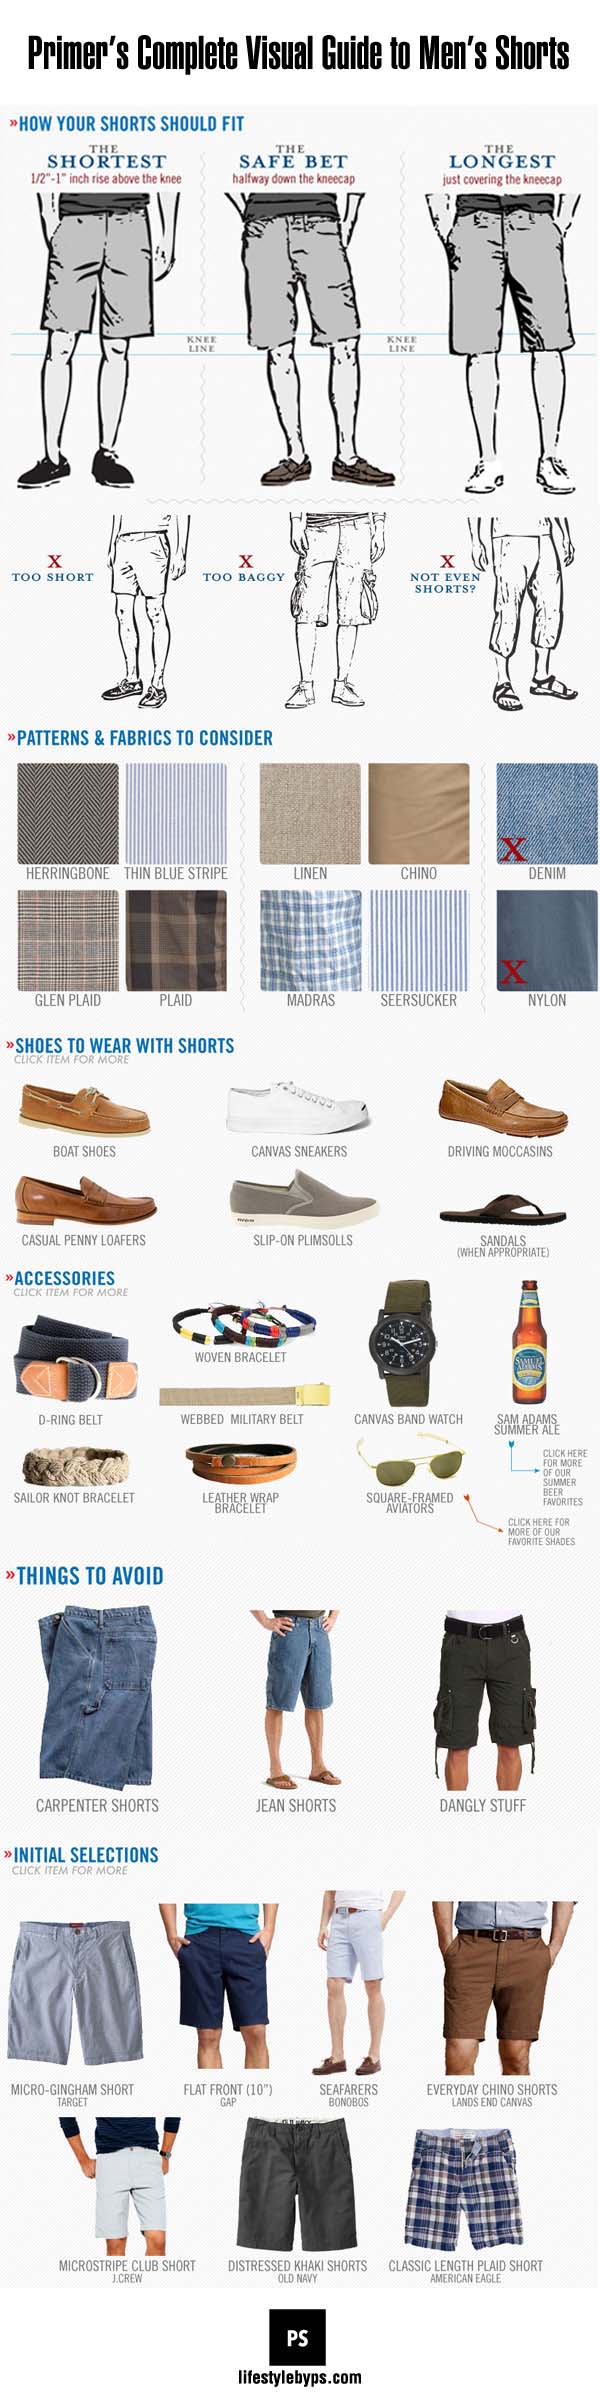 How to wear shorts for men